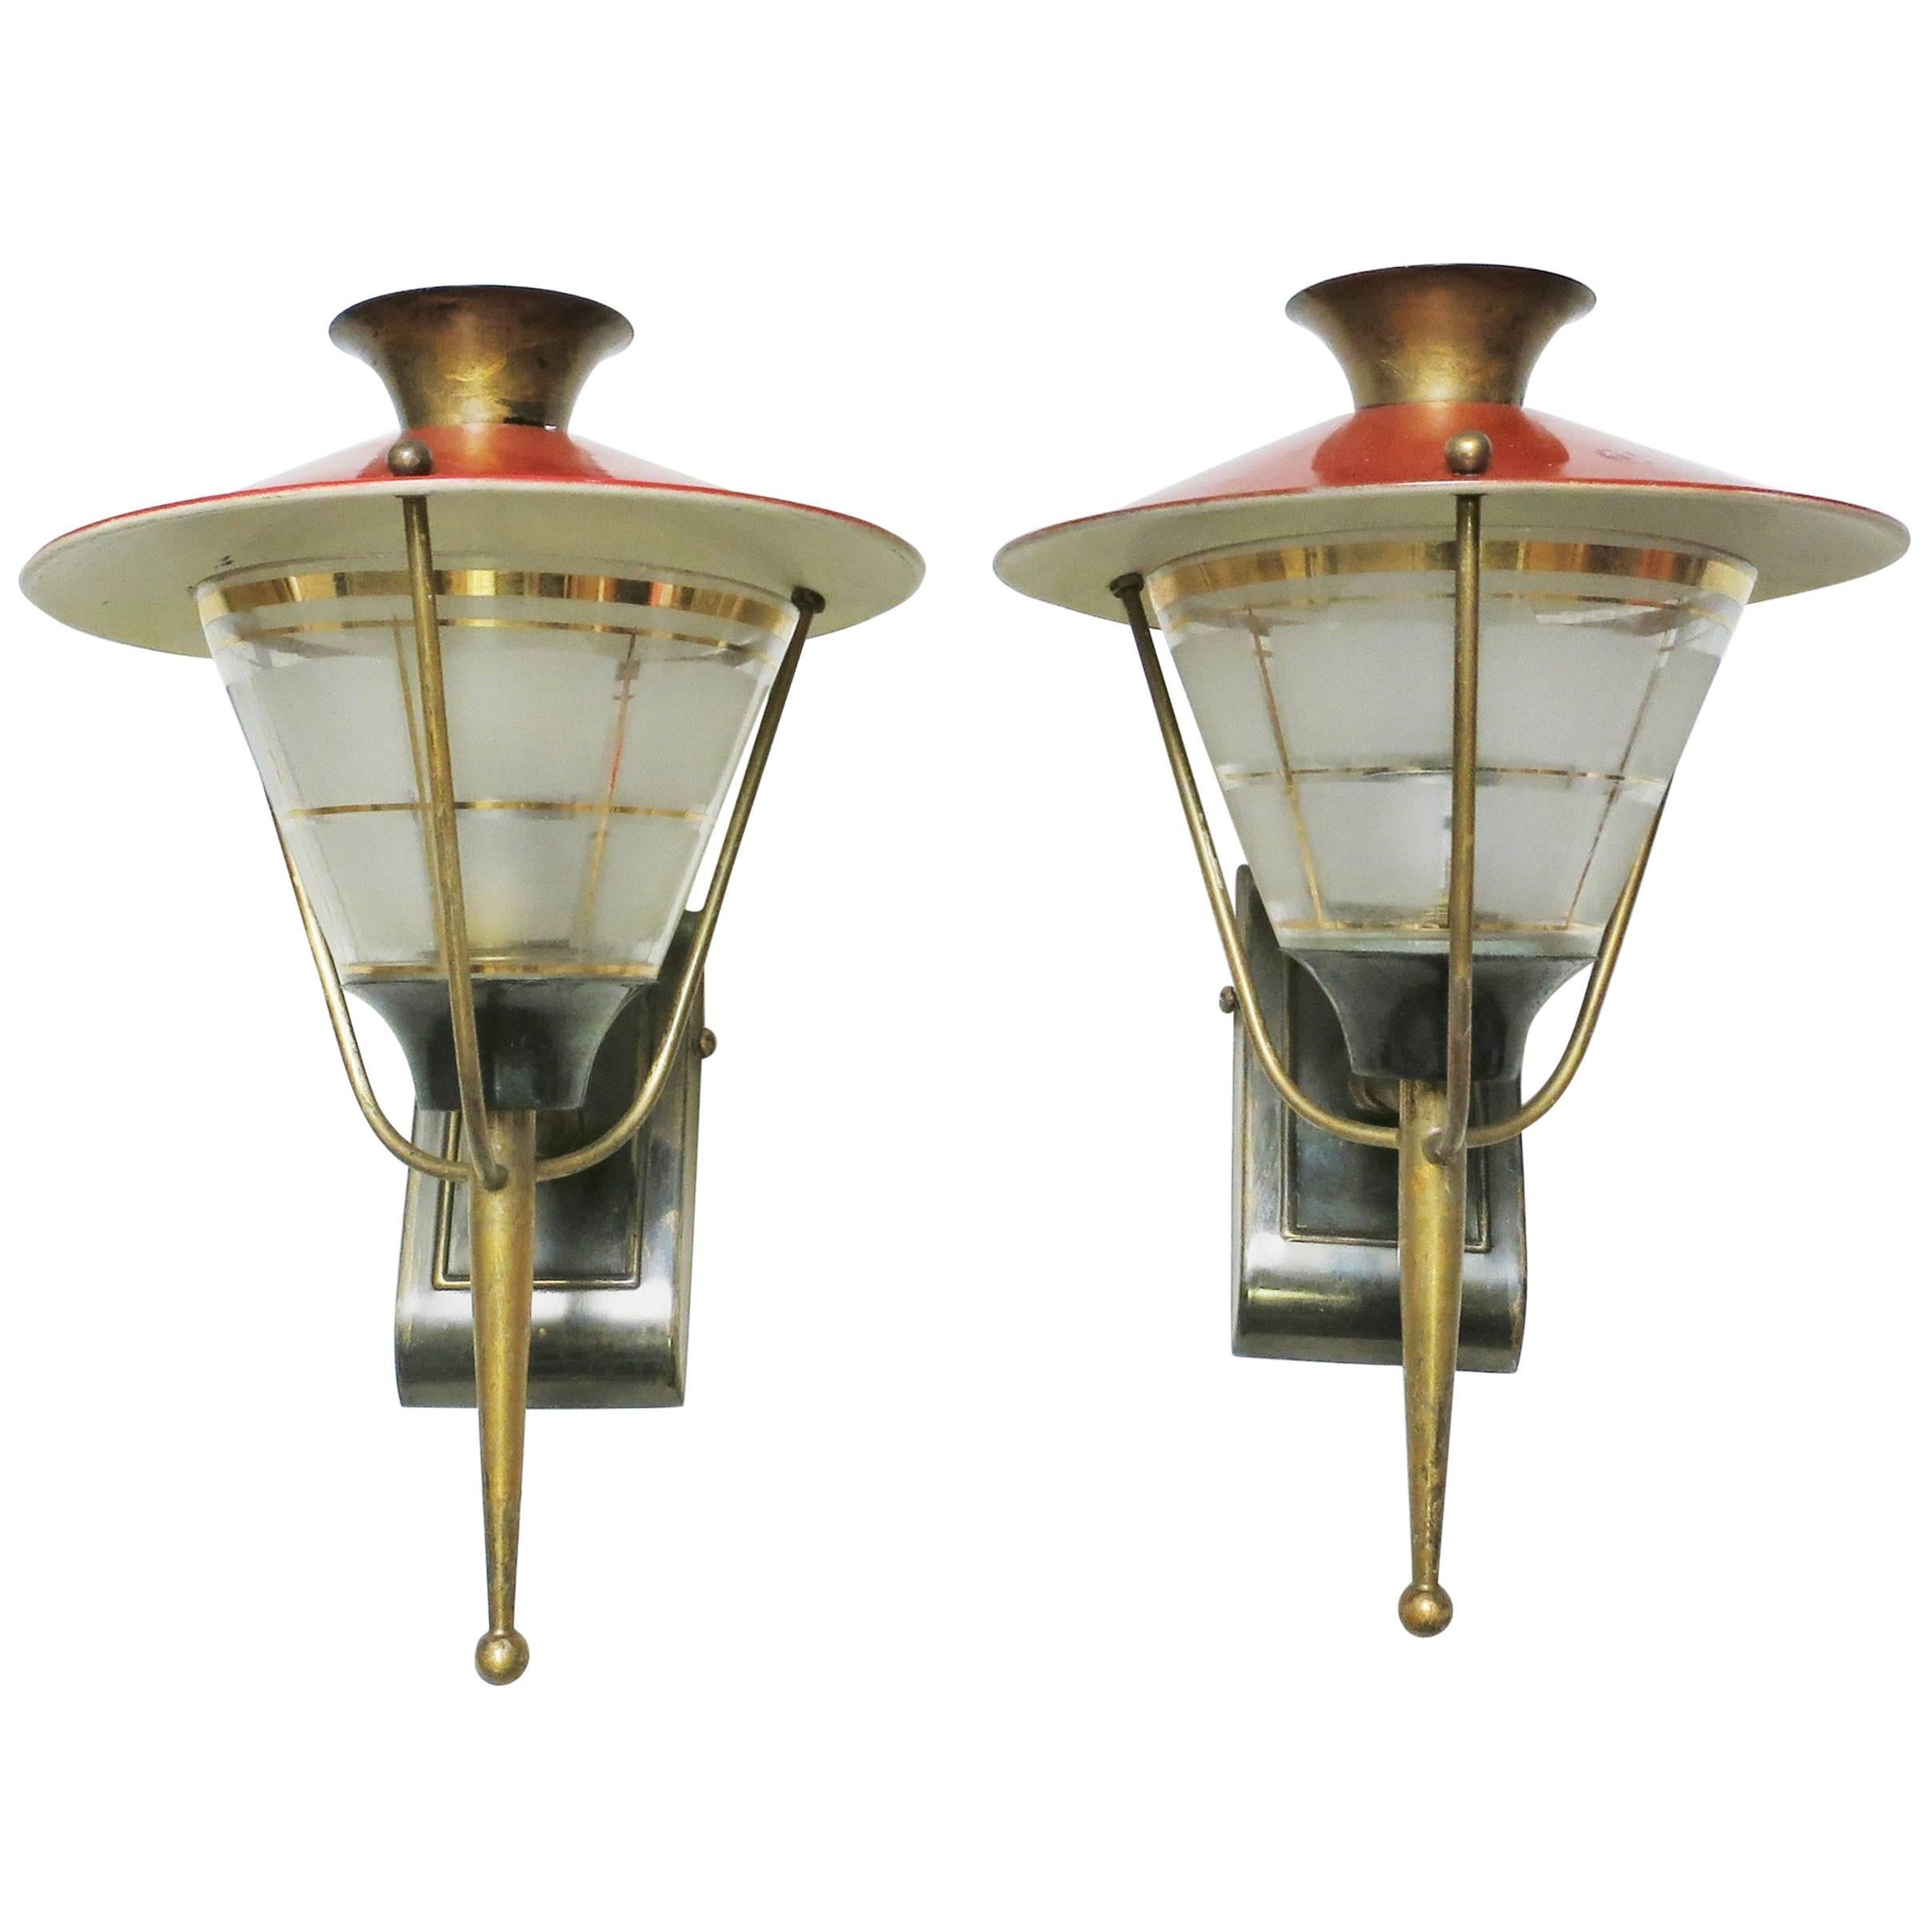 Pair of French Midcentury Lantern Sconces by Maison Lunel